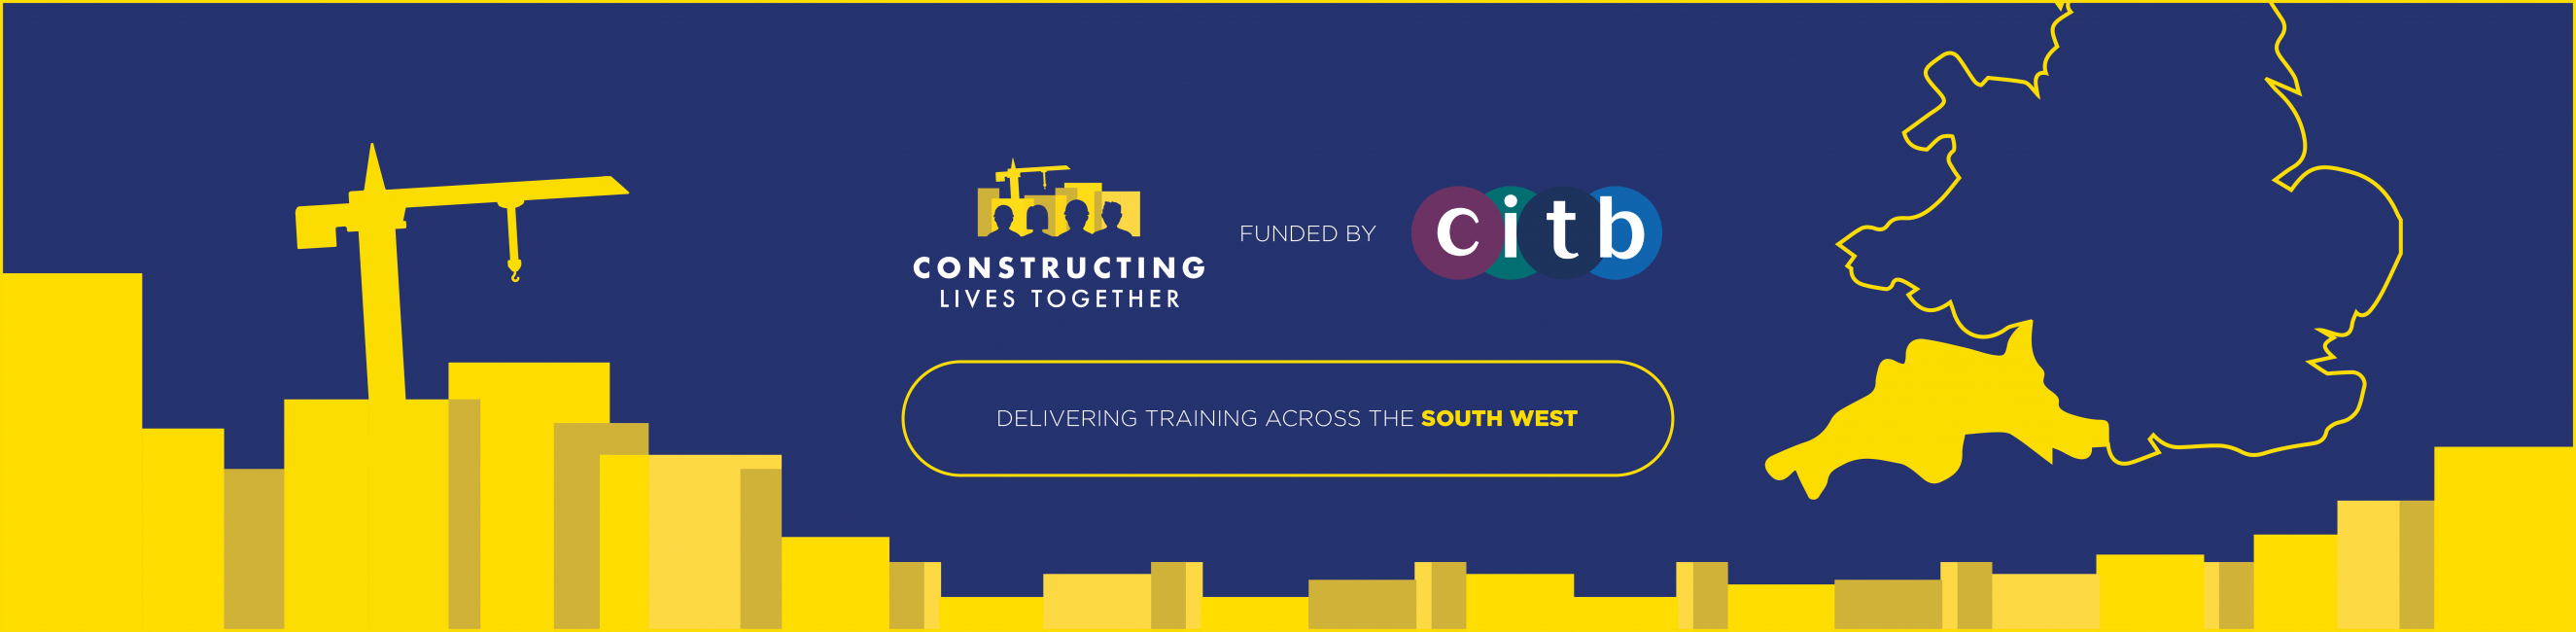 Constructing Lives Together logo by map of South West, with text saying 'construction training across the south west'